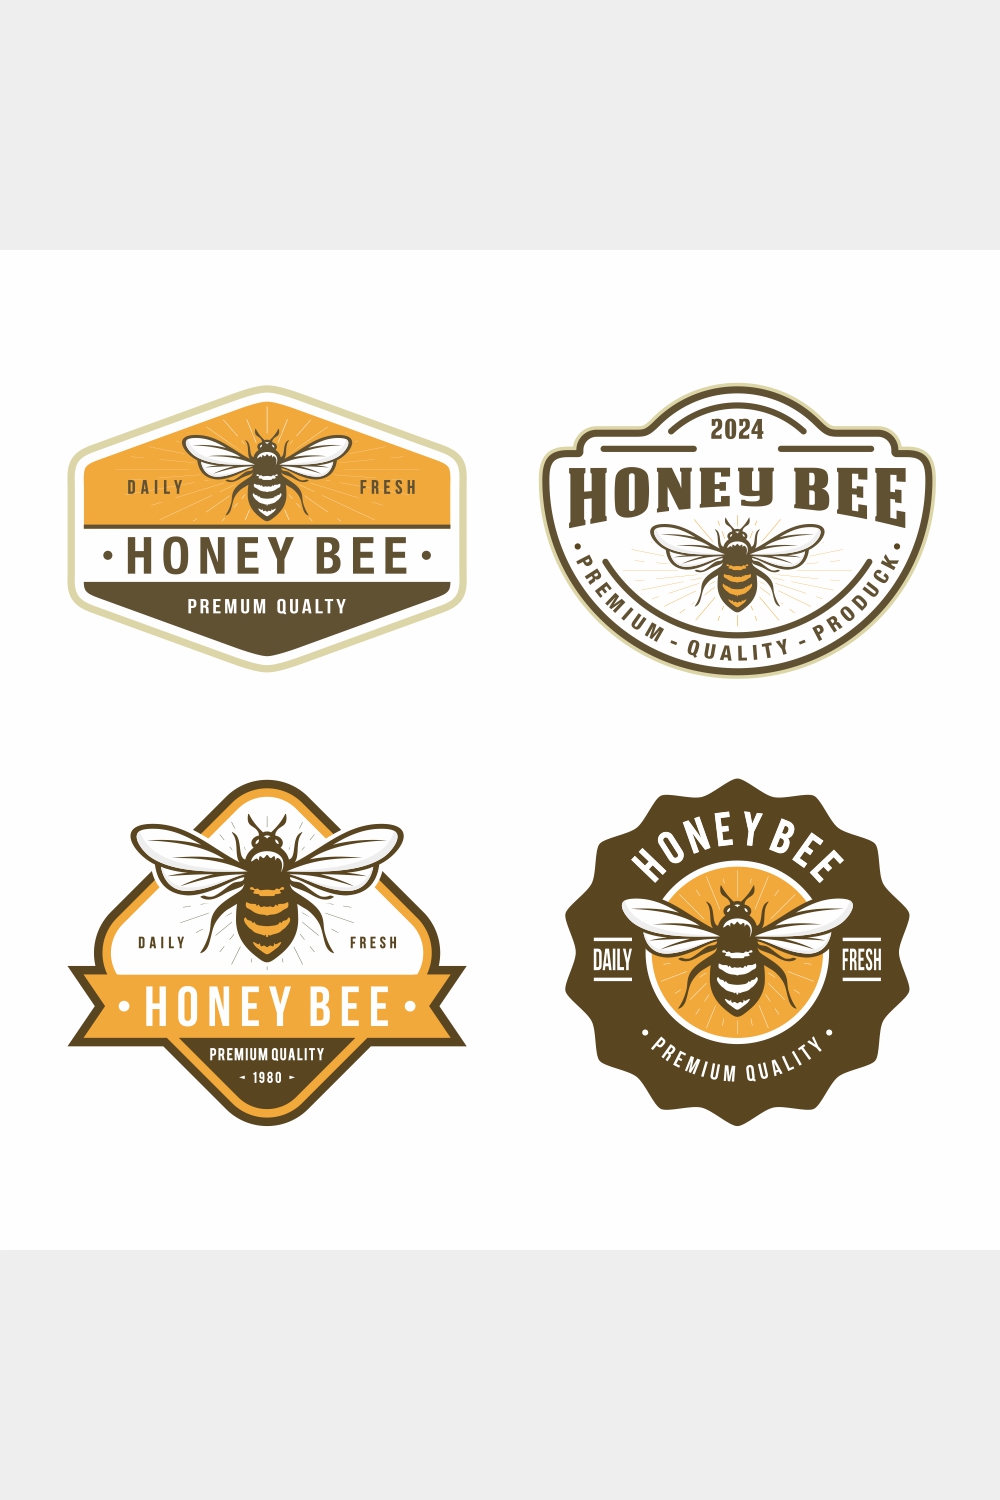 Fresh Honey Bee logo design collection - only 9$ pinterest preview image.